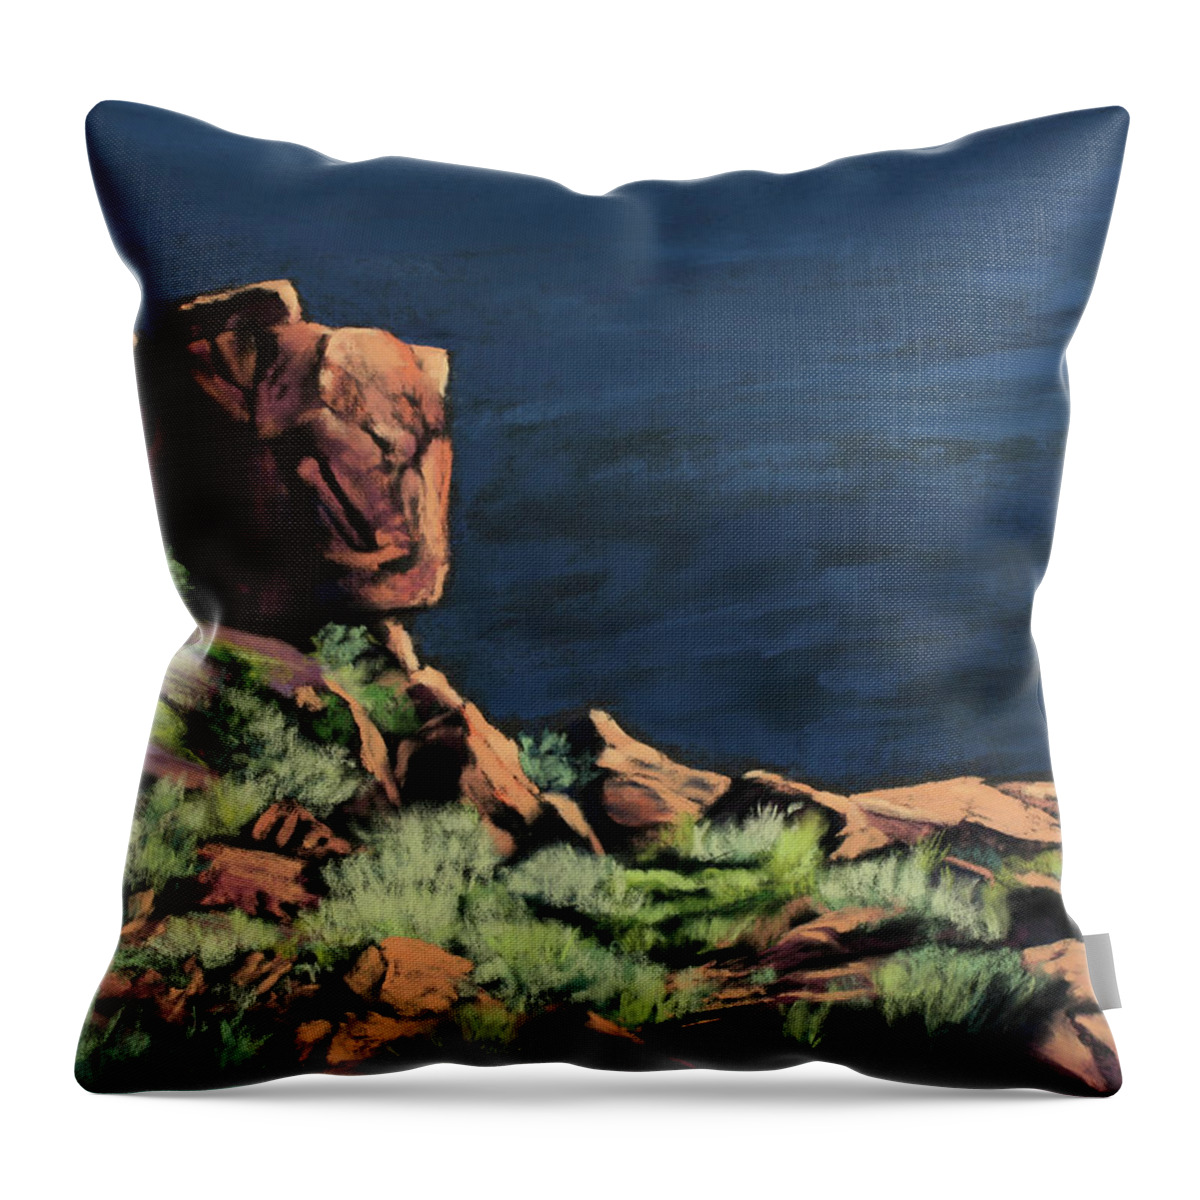 Rocks Throw Pillow featuring the painting Illuminated by Sandi Snead